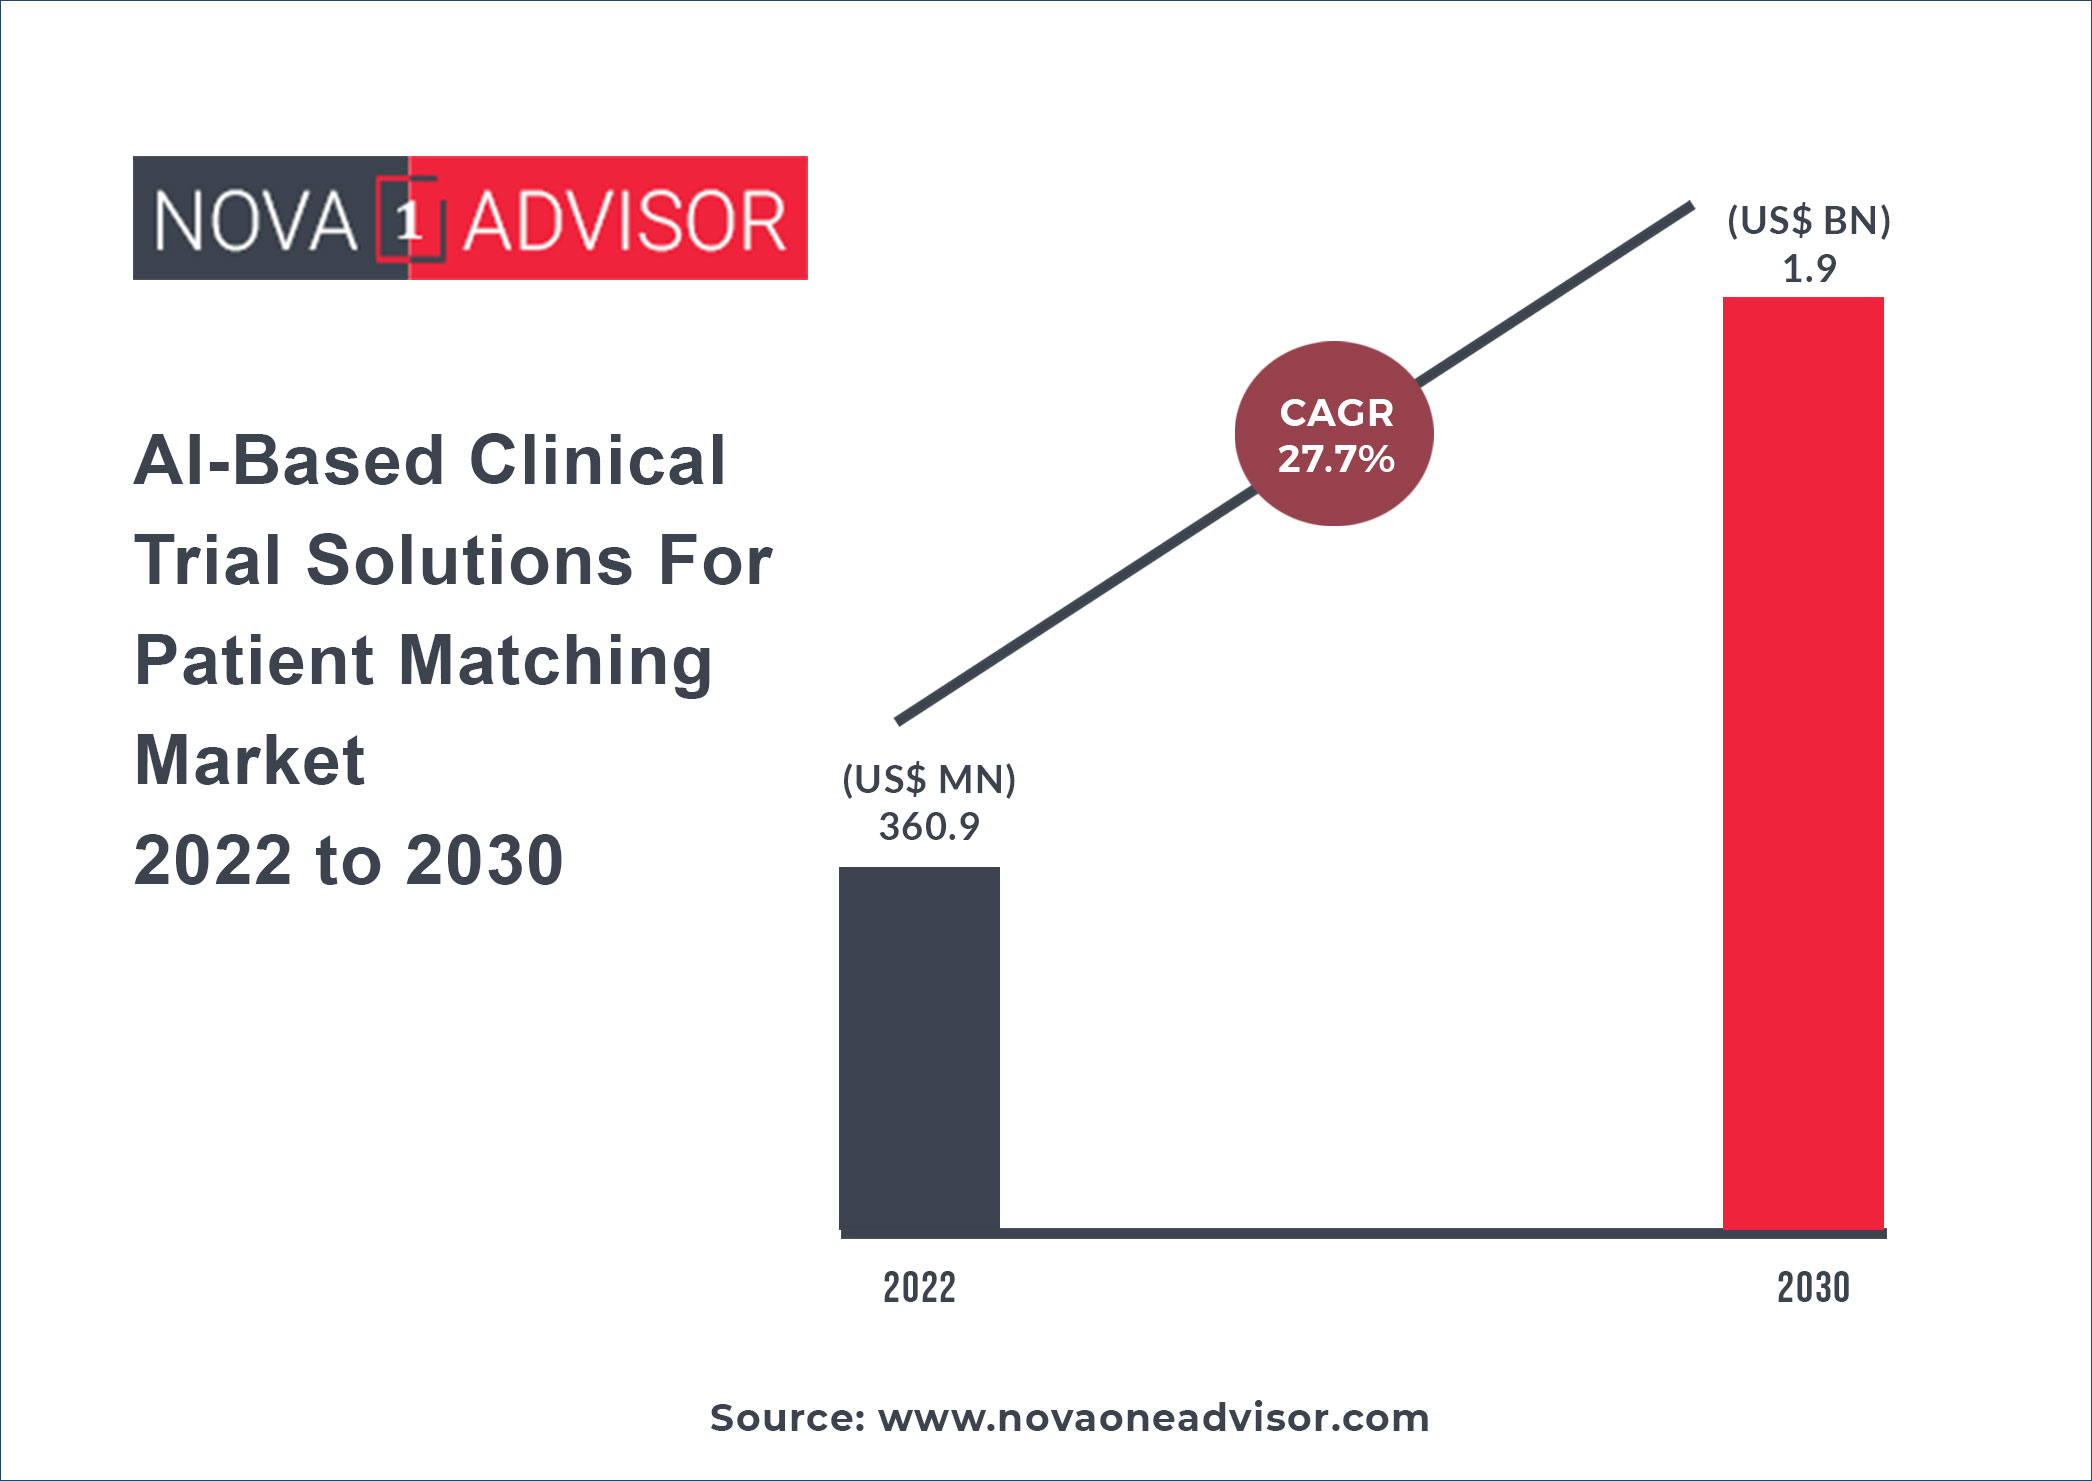 https://www.novaoneadvisor.com/reportimg/AI-Based-Clinical-Trial-Solutions-For-Patient-Matching-Market-2022-to-2030.jpg